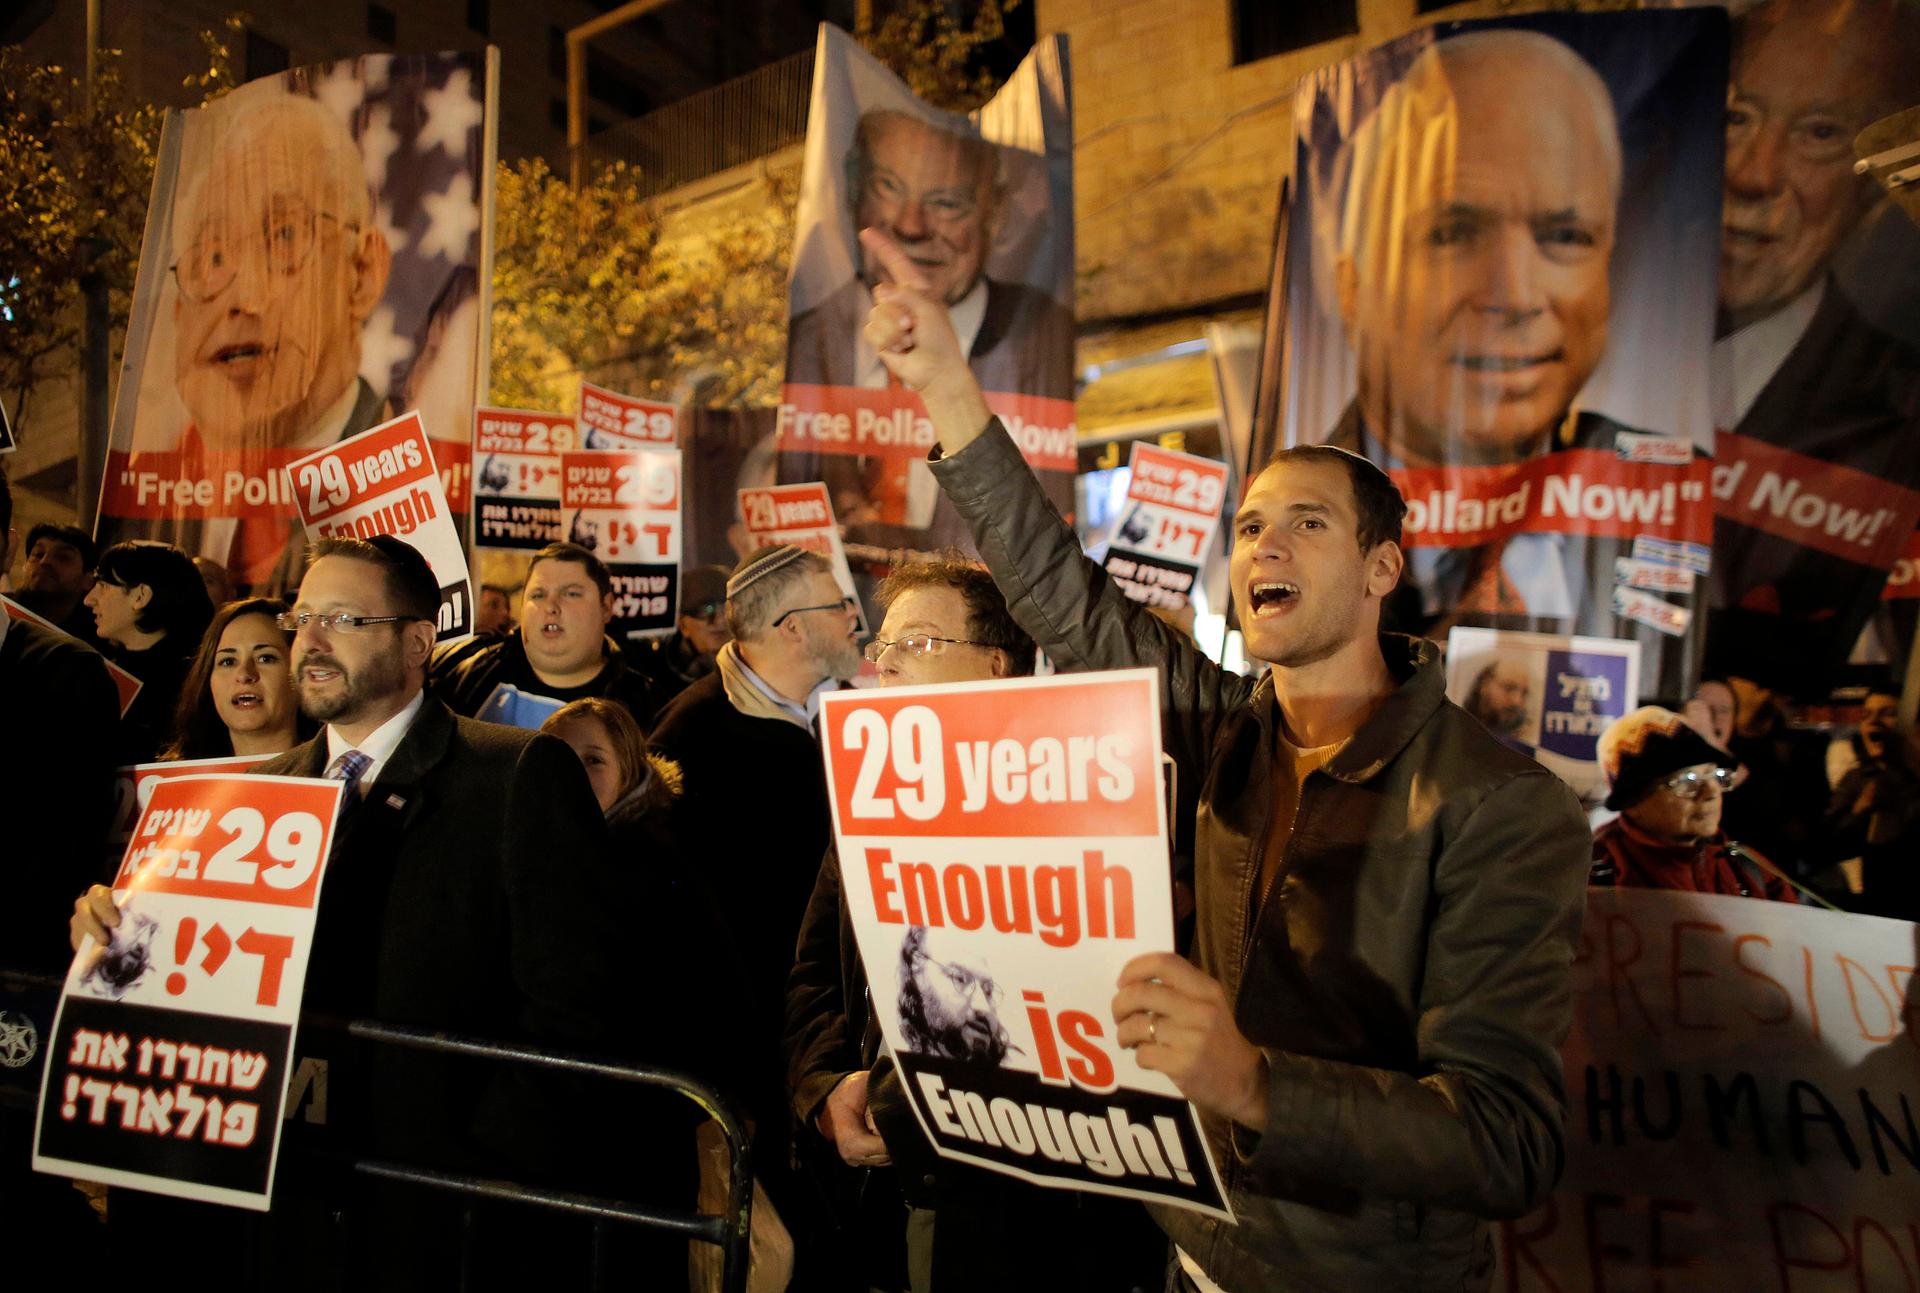 Israelis hold placards during a protest calling for the release of Jonathan Pollard from U.S. prison, outside U.S. Secretary of State John Kerry's hotel in Jerusalem on January 2, 2014.